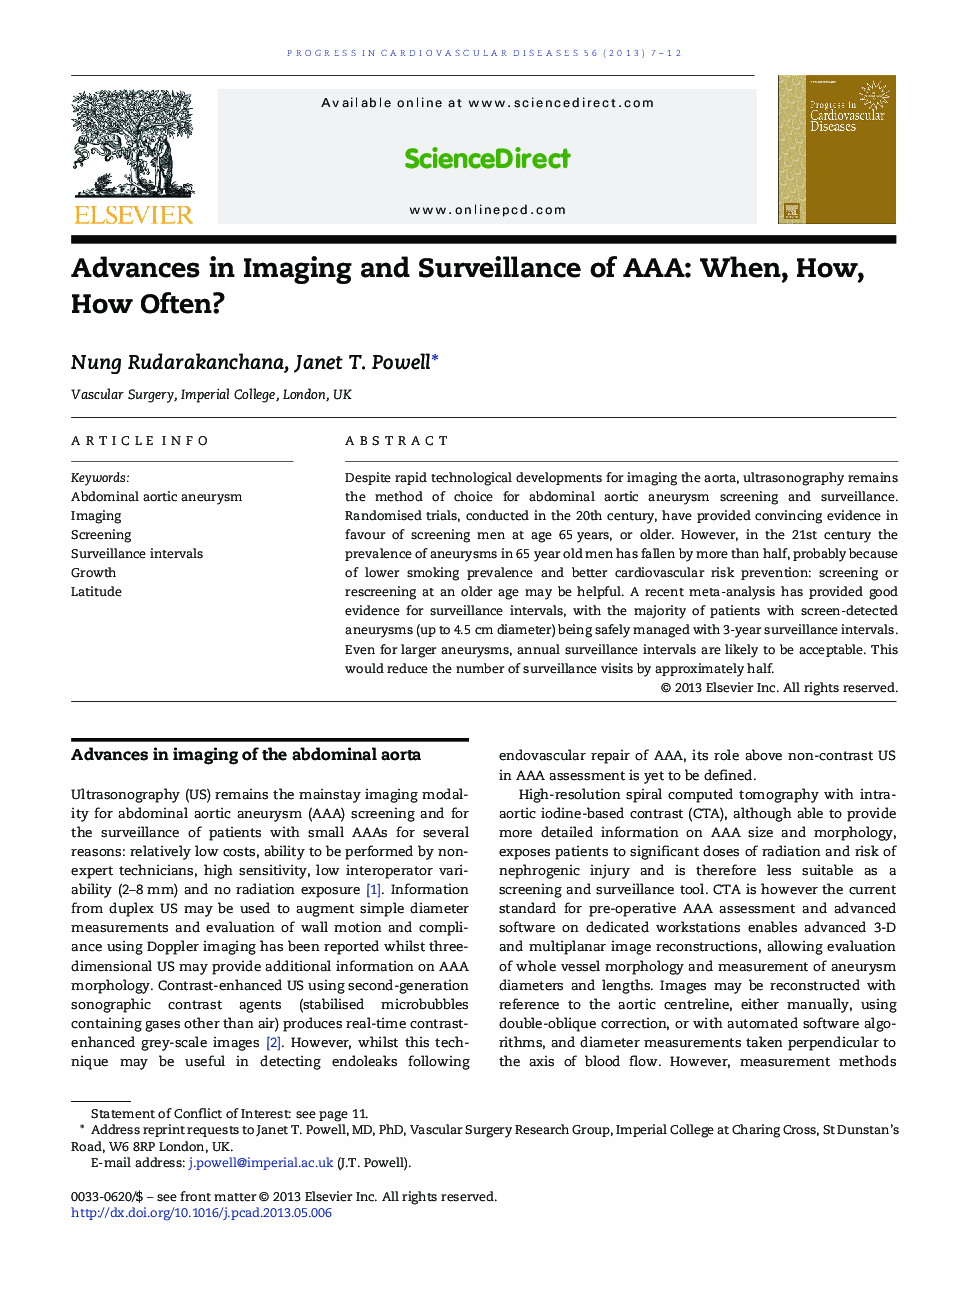 Advances in Imaging and Surveillance of AAA: When, How, How Often? 